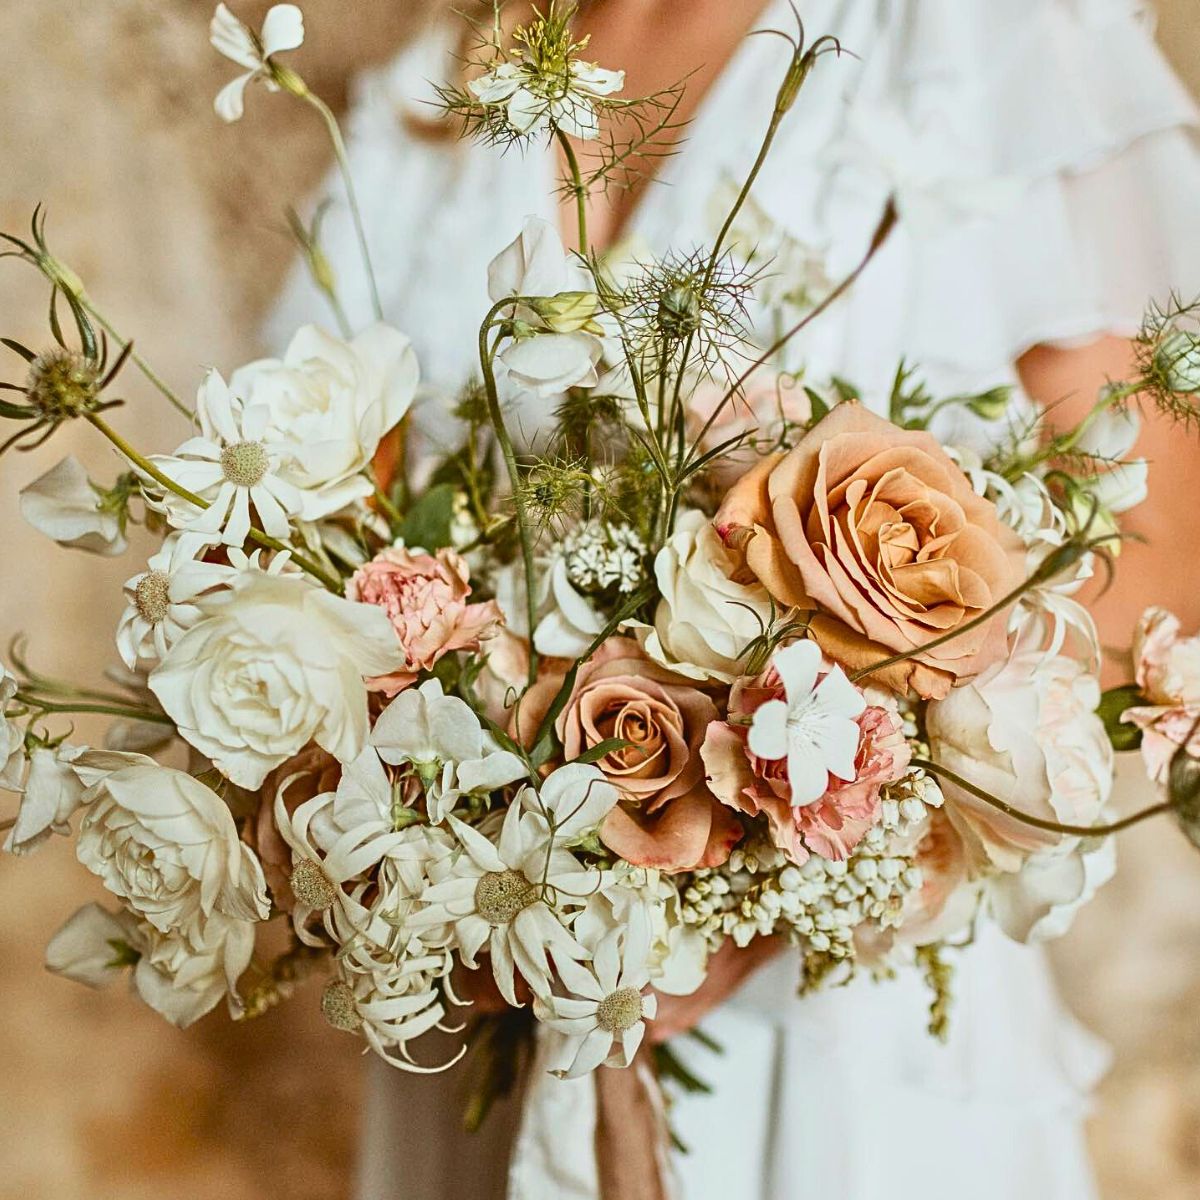 Ways to Make Your Wedding Flowers More Sustainable